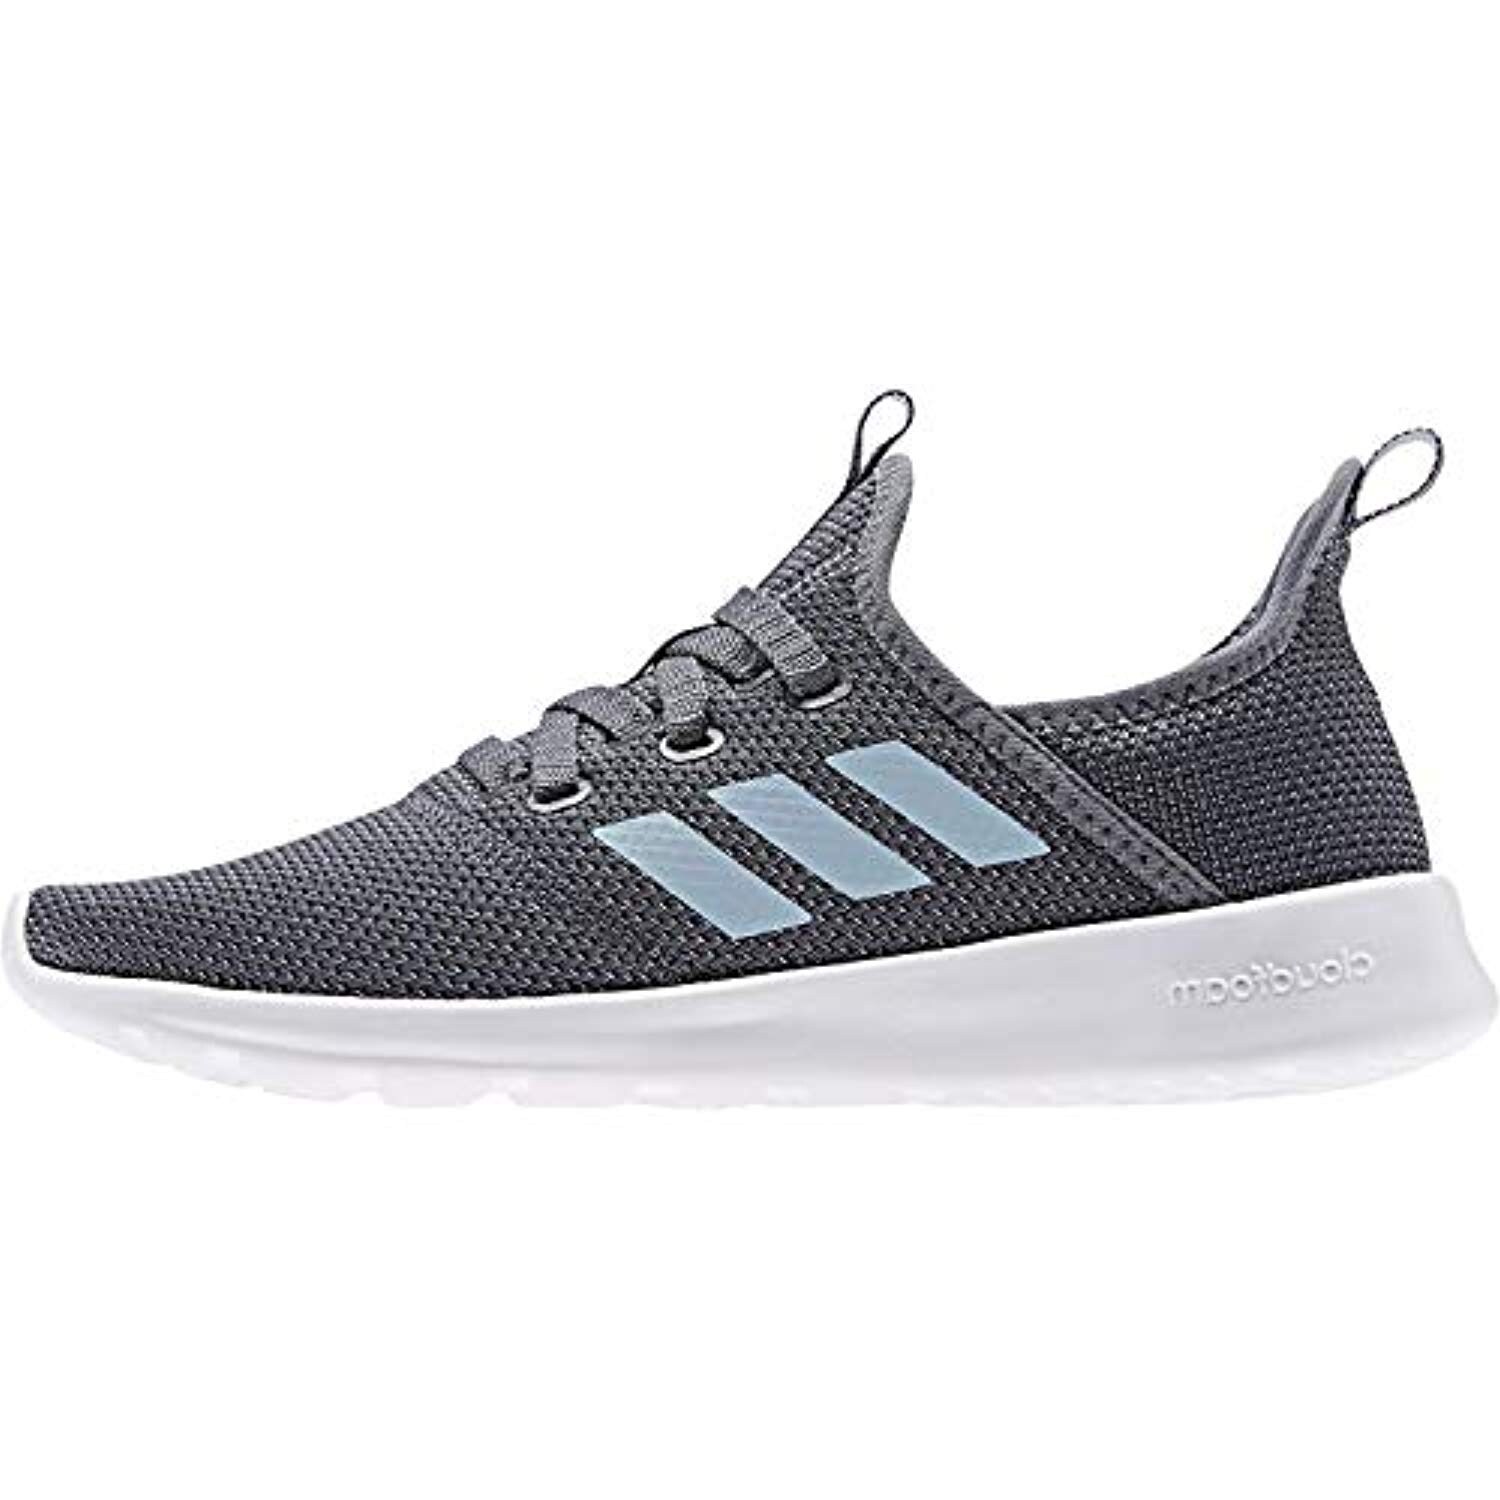 adidas cloudfoam women's grey and pink